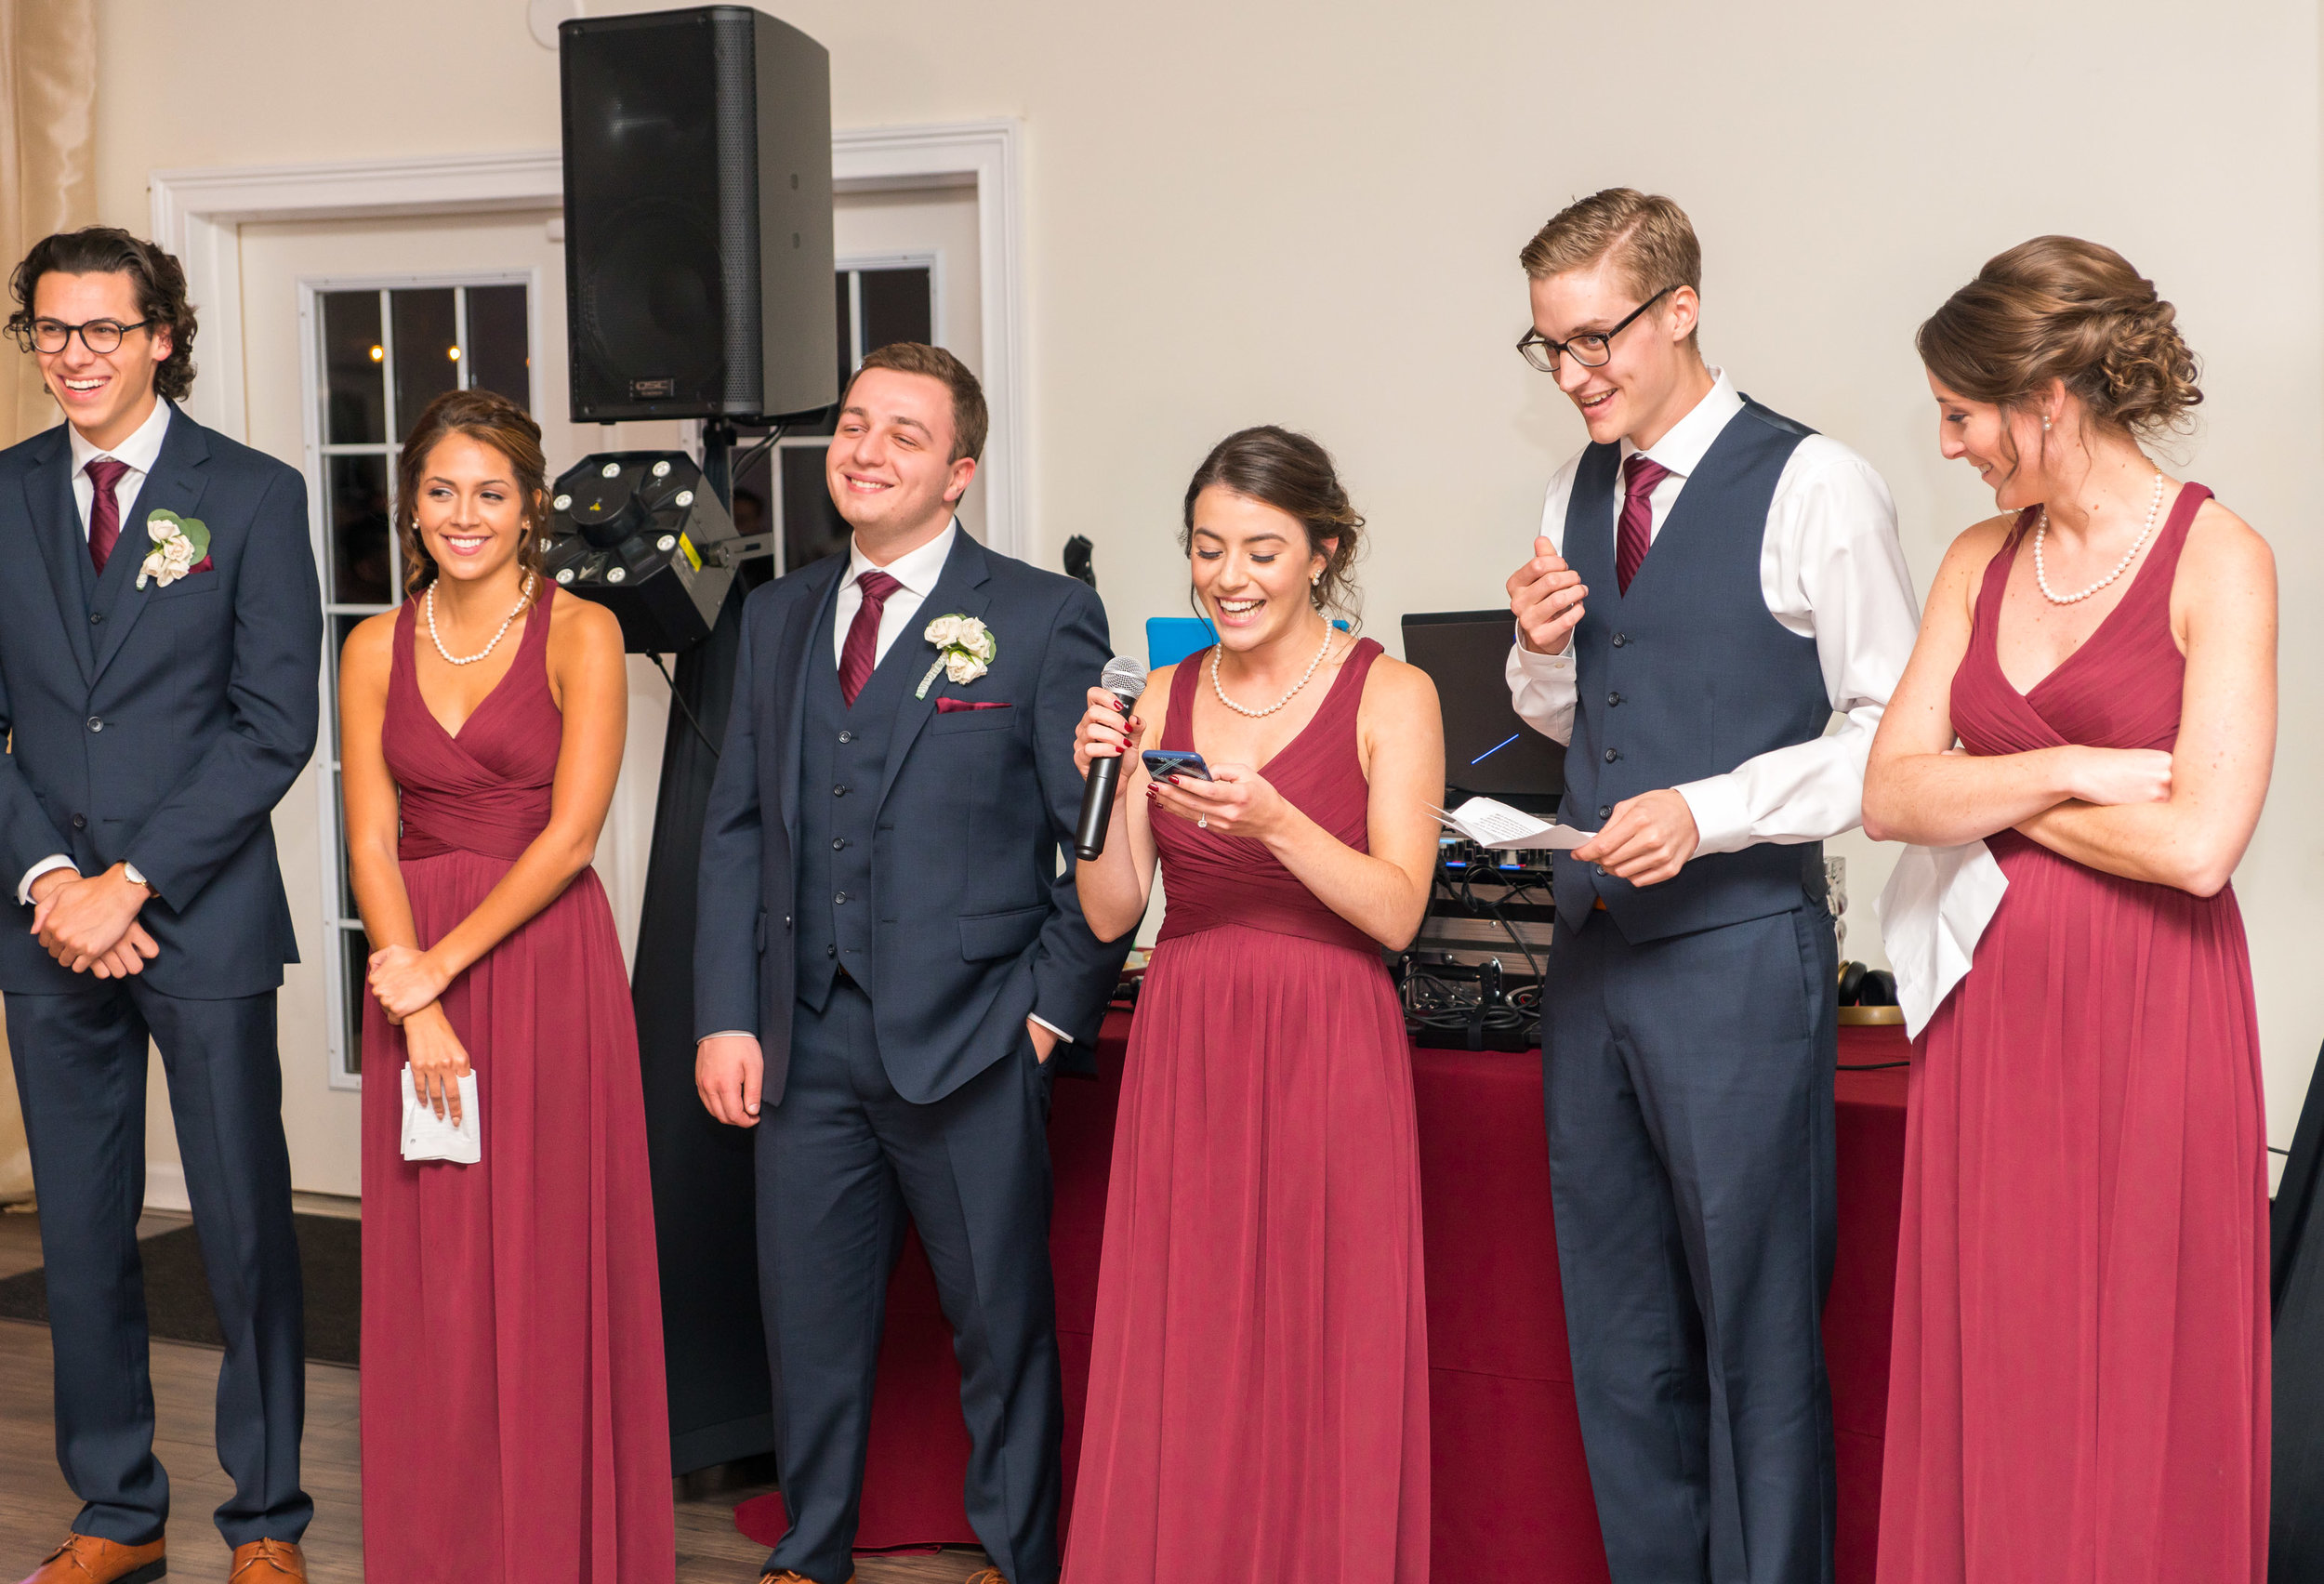 Bridal party reading their toasts Lost Creek Winery